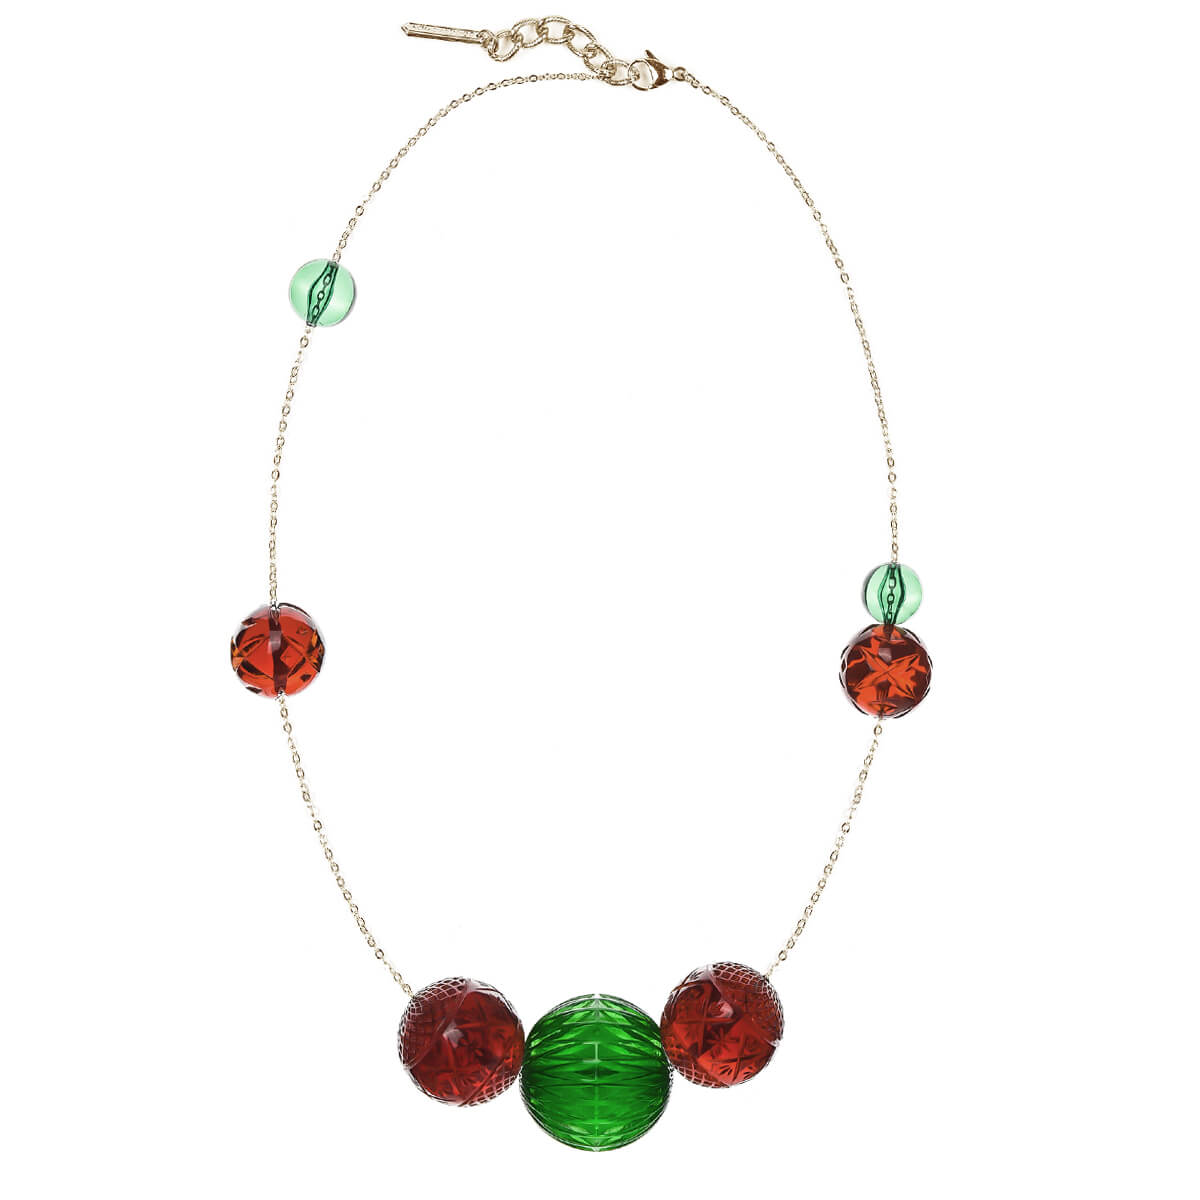 50% OFF Long Random Sphere Necklace Amber & Green